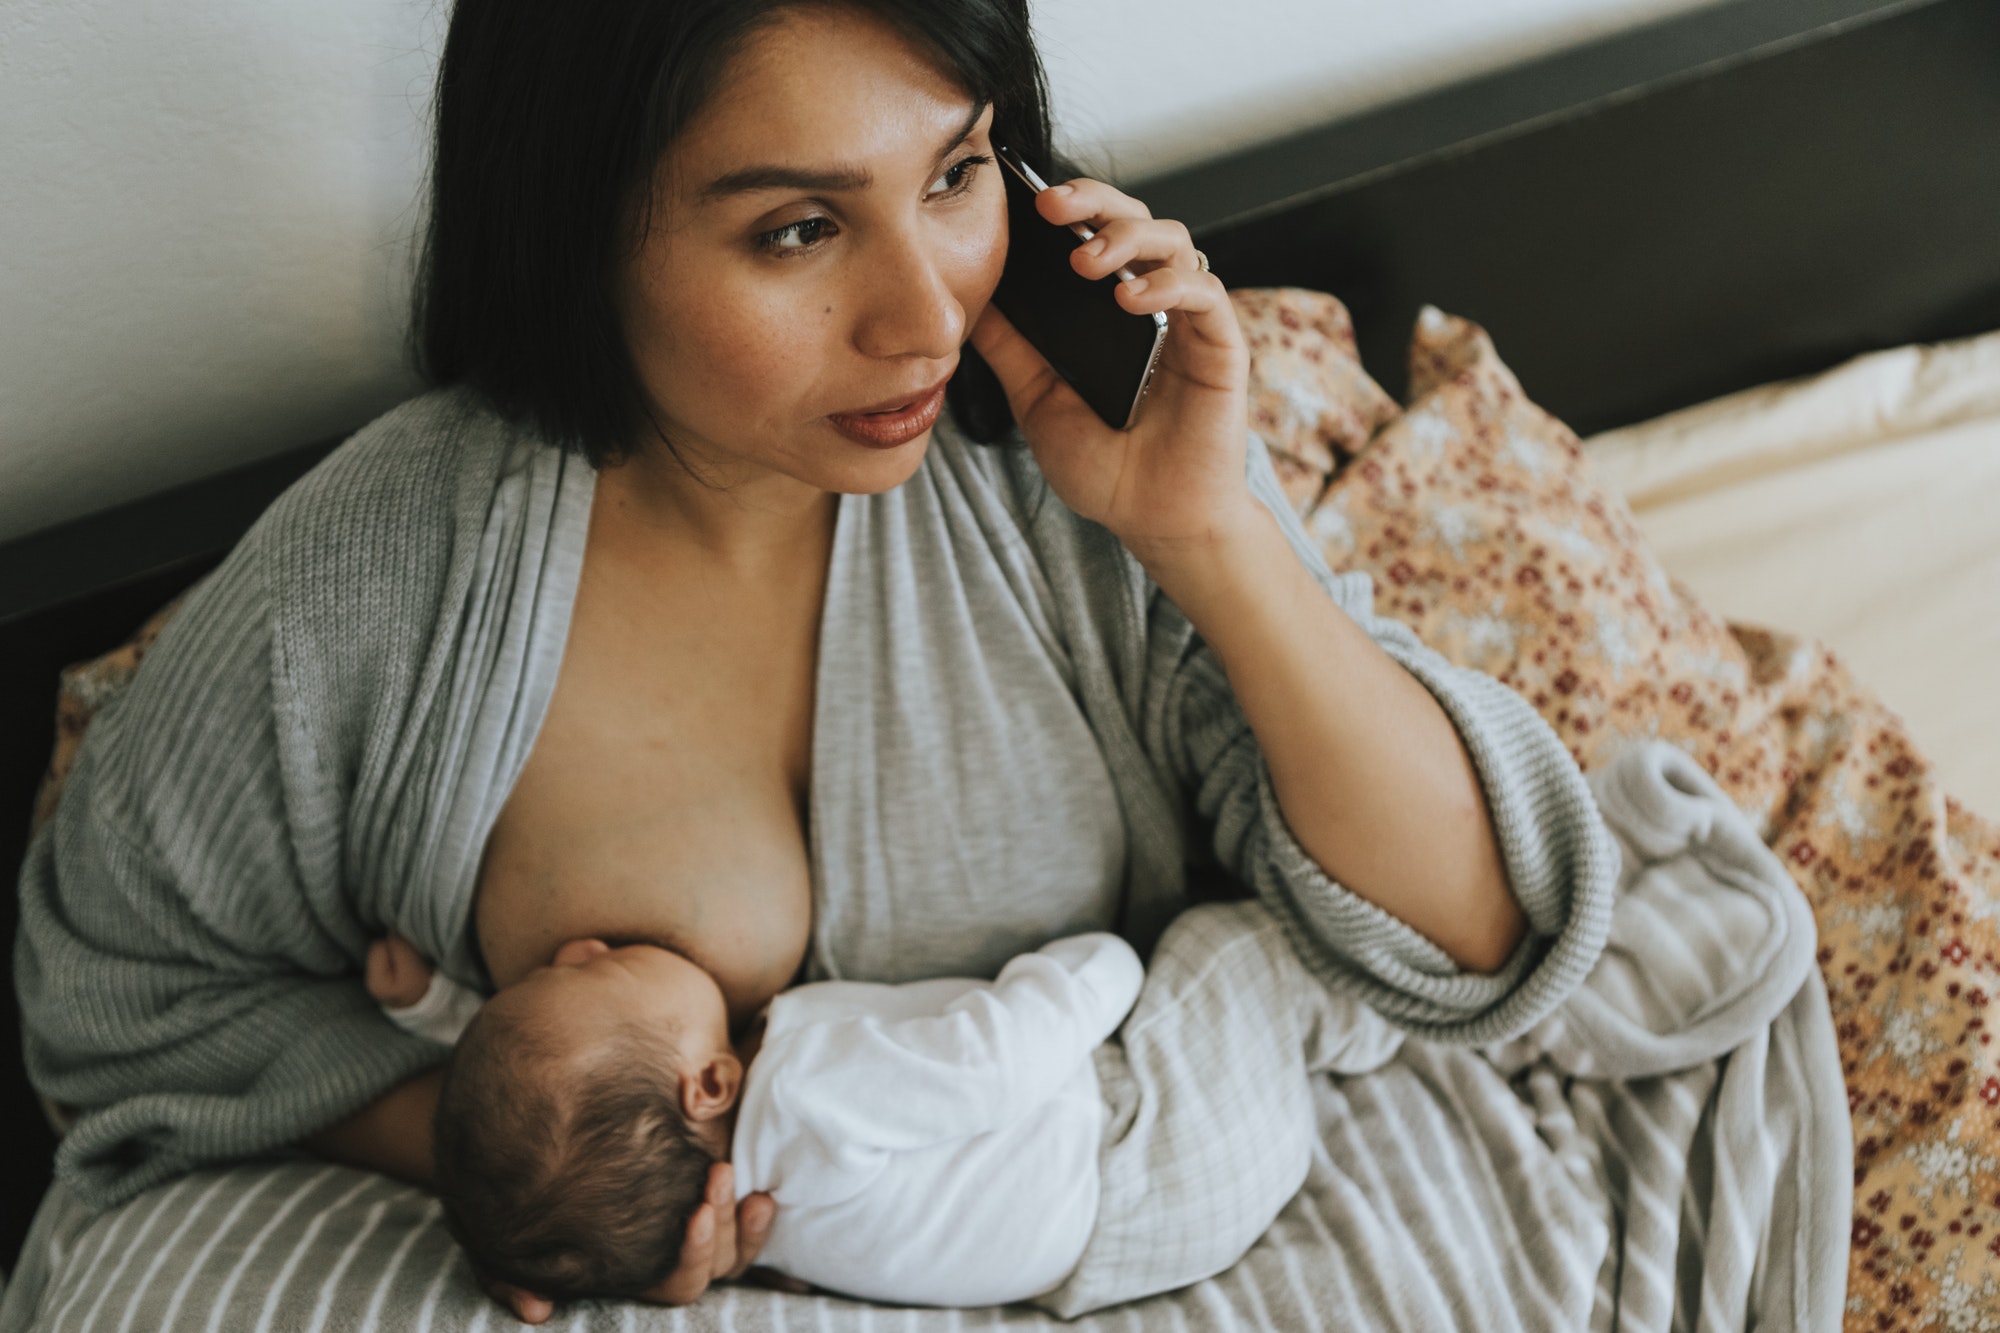 Mother breastfeeding while on the phone